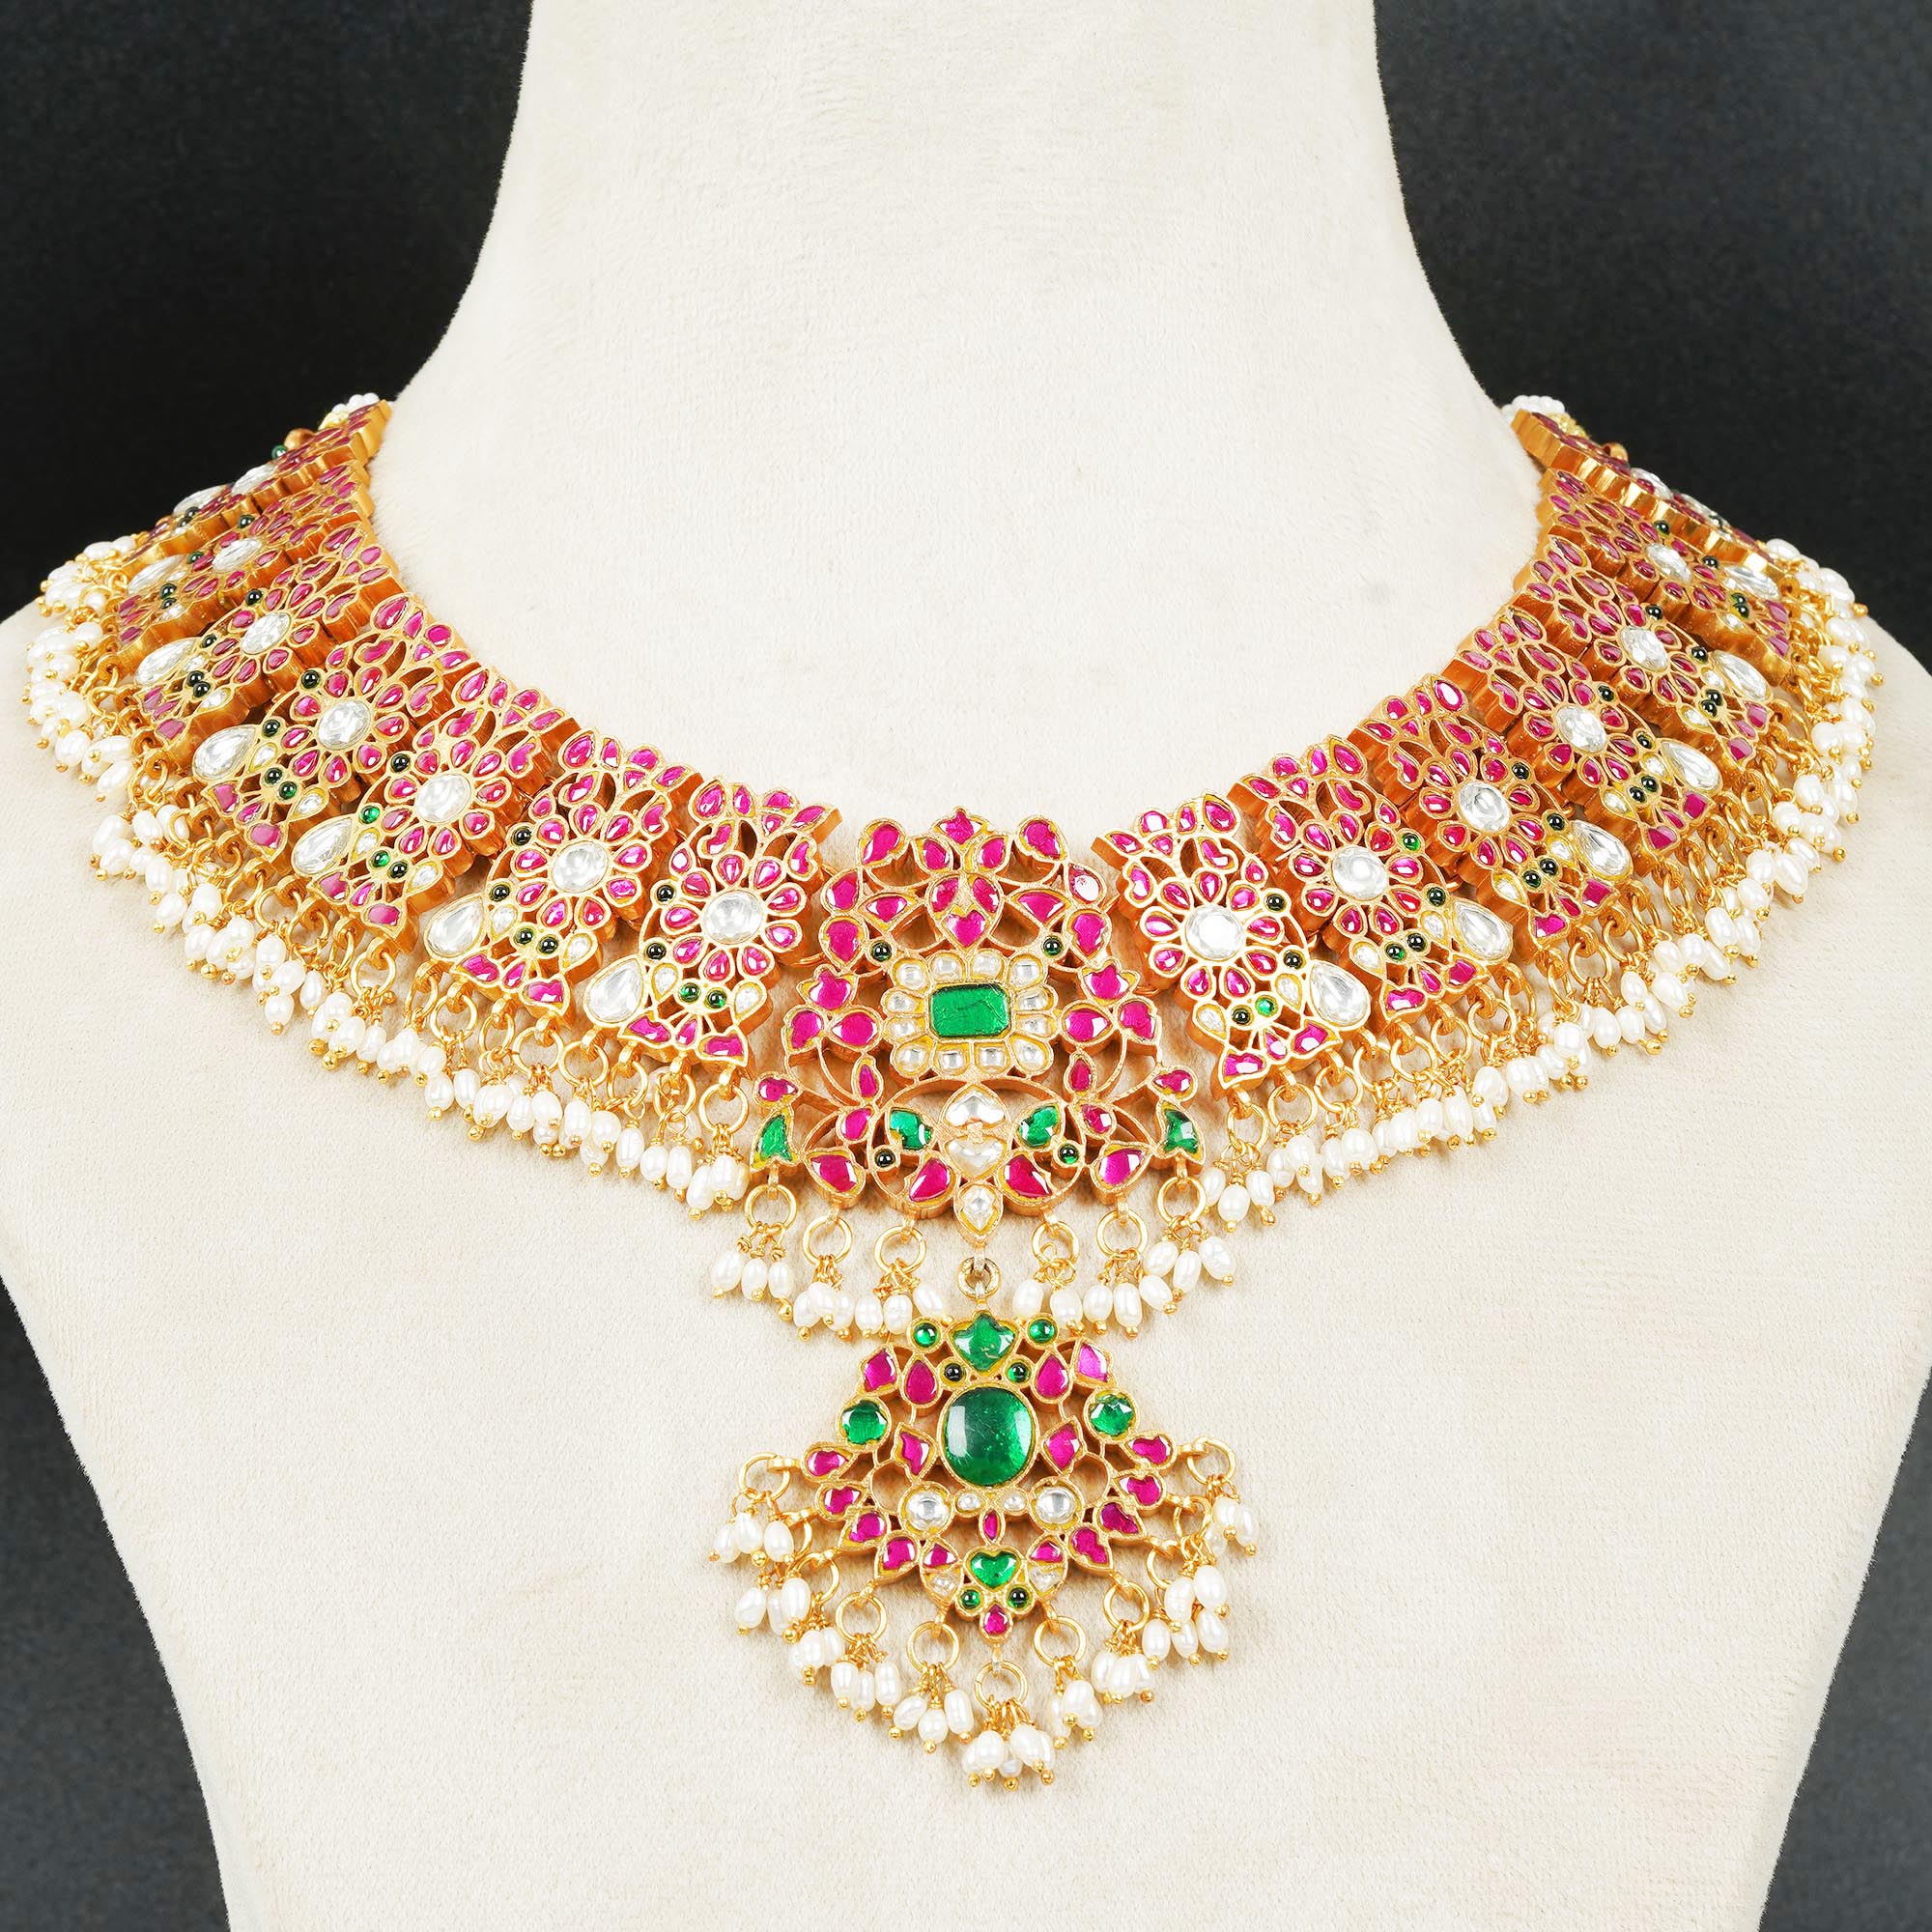 Elongated Statement Indian Kundan Necklace in Pink and Green